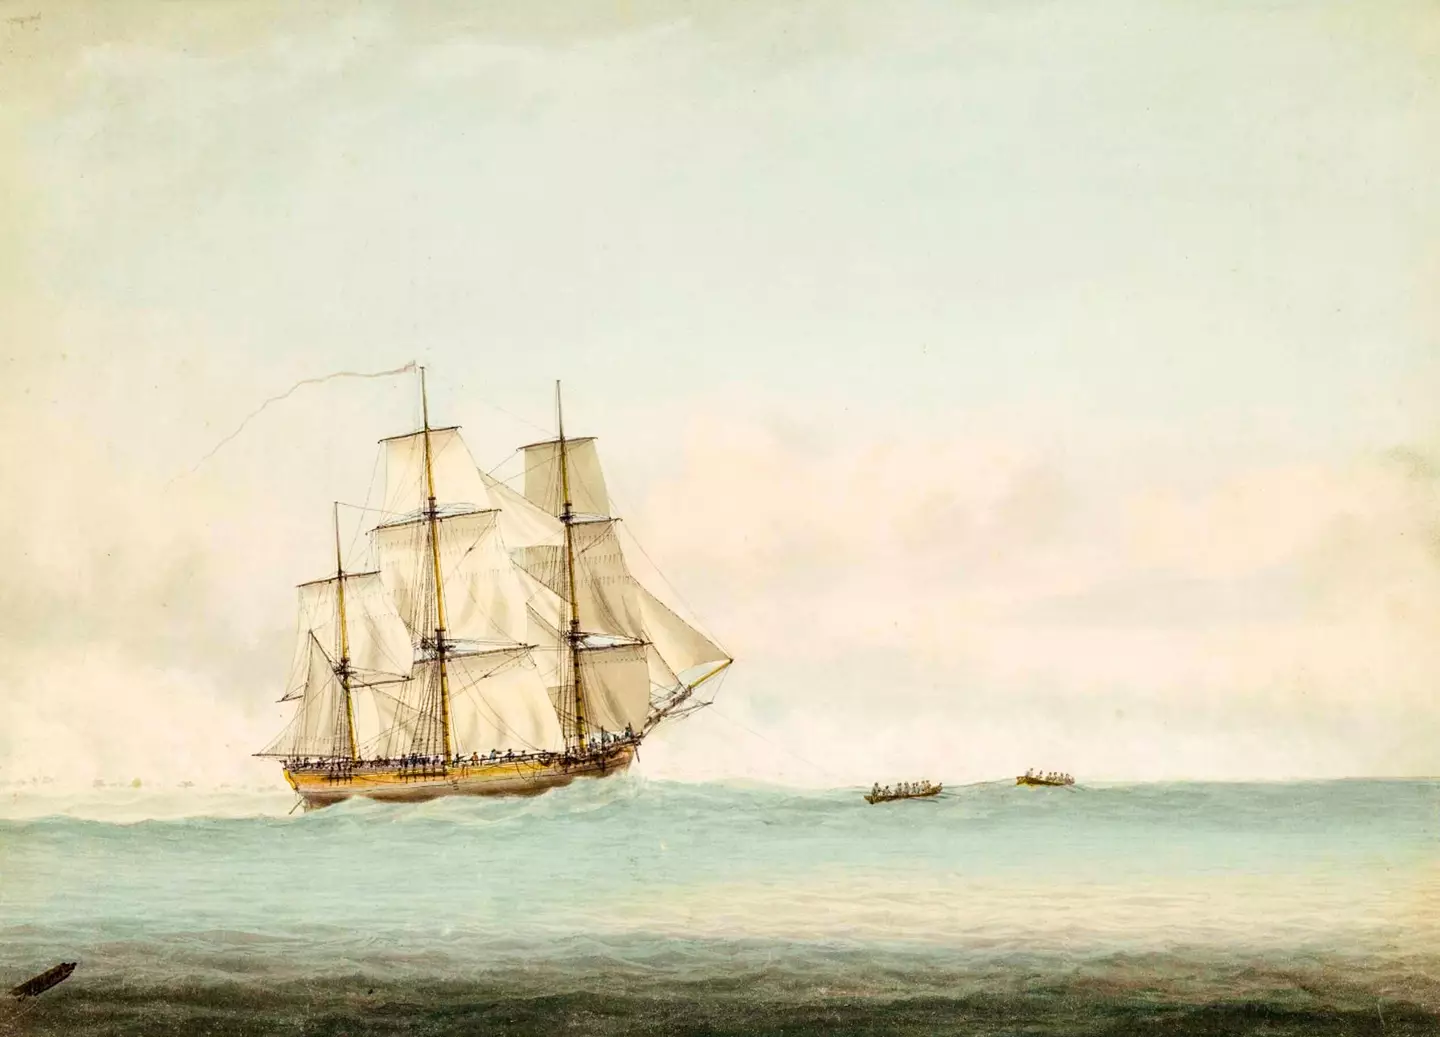 A 1794 painting of Endeavour.